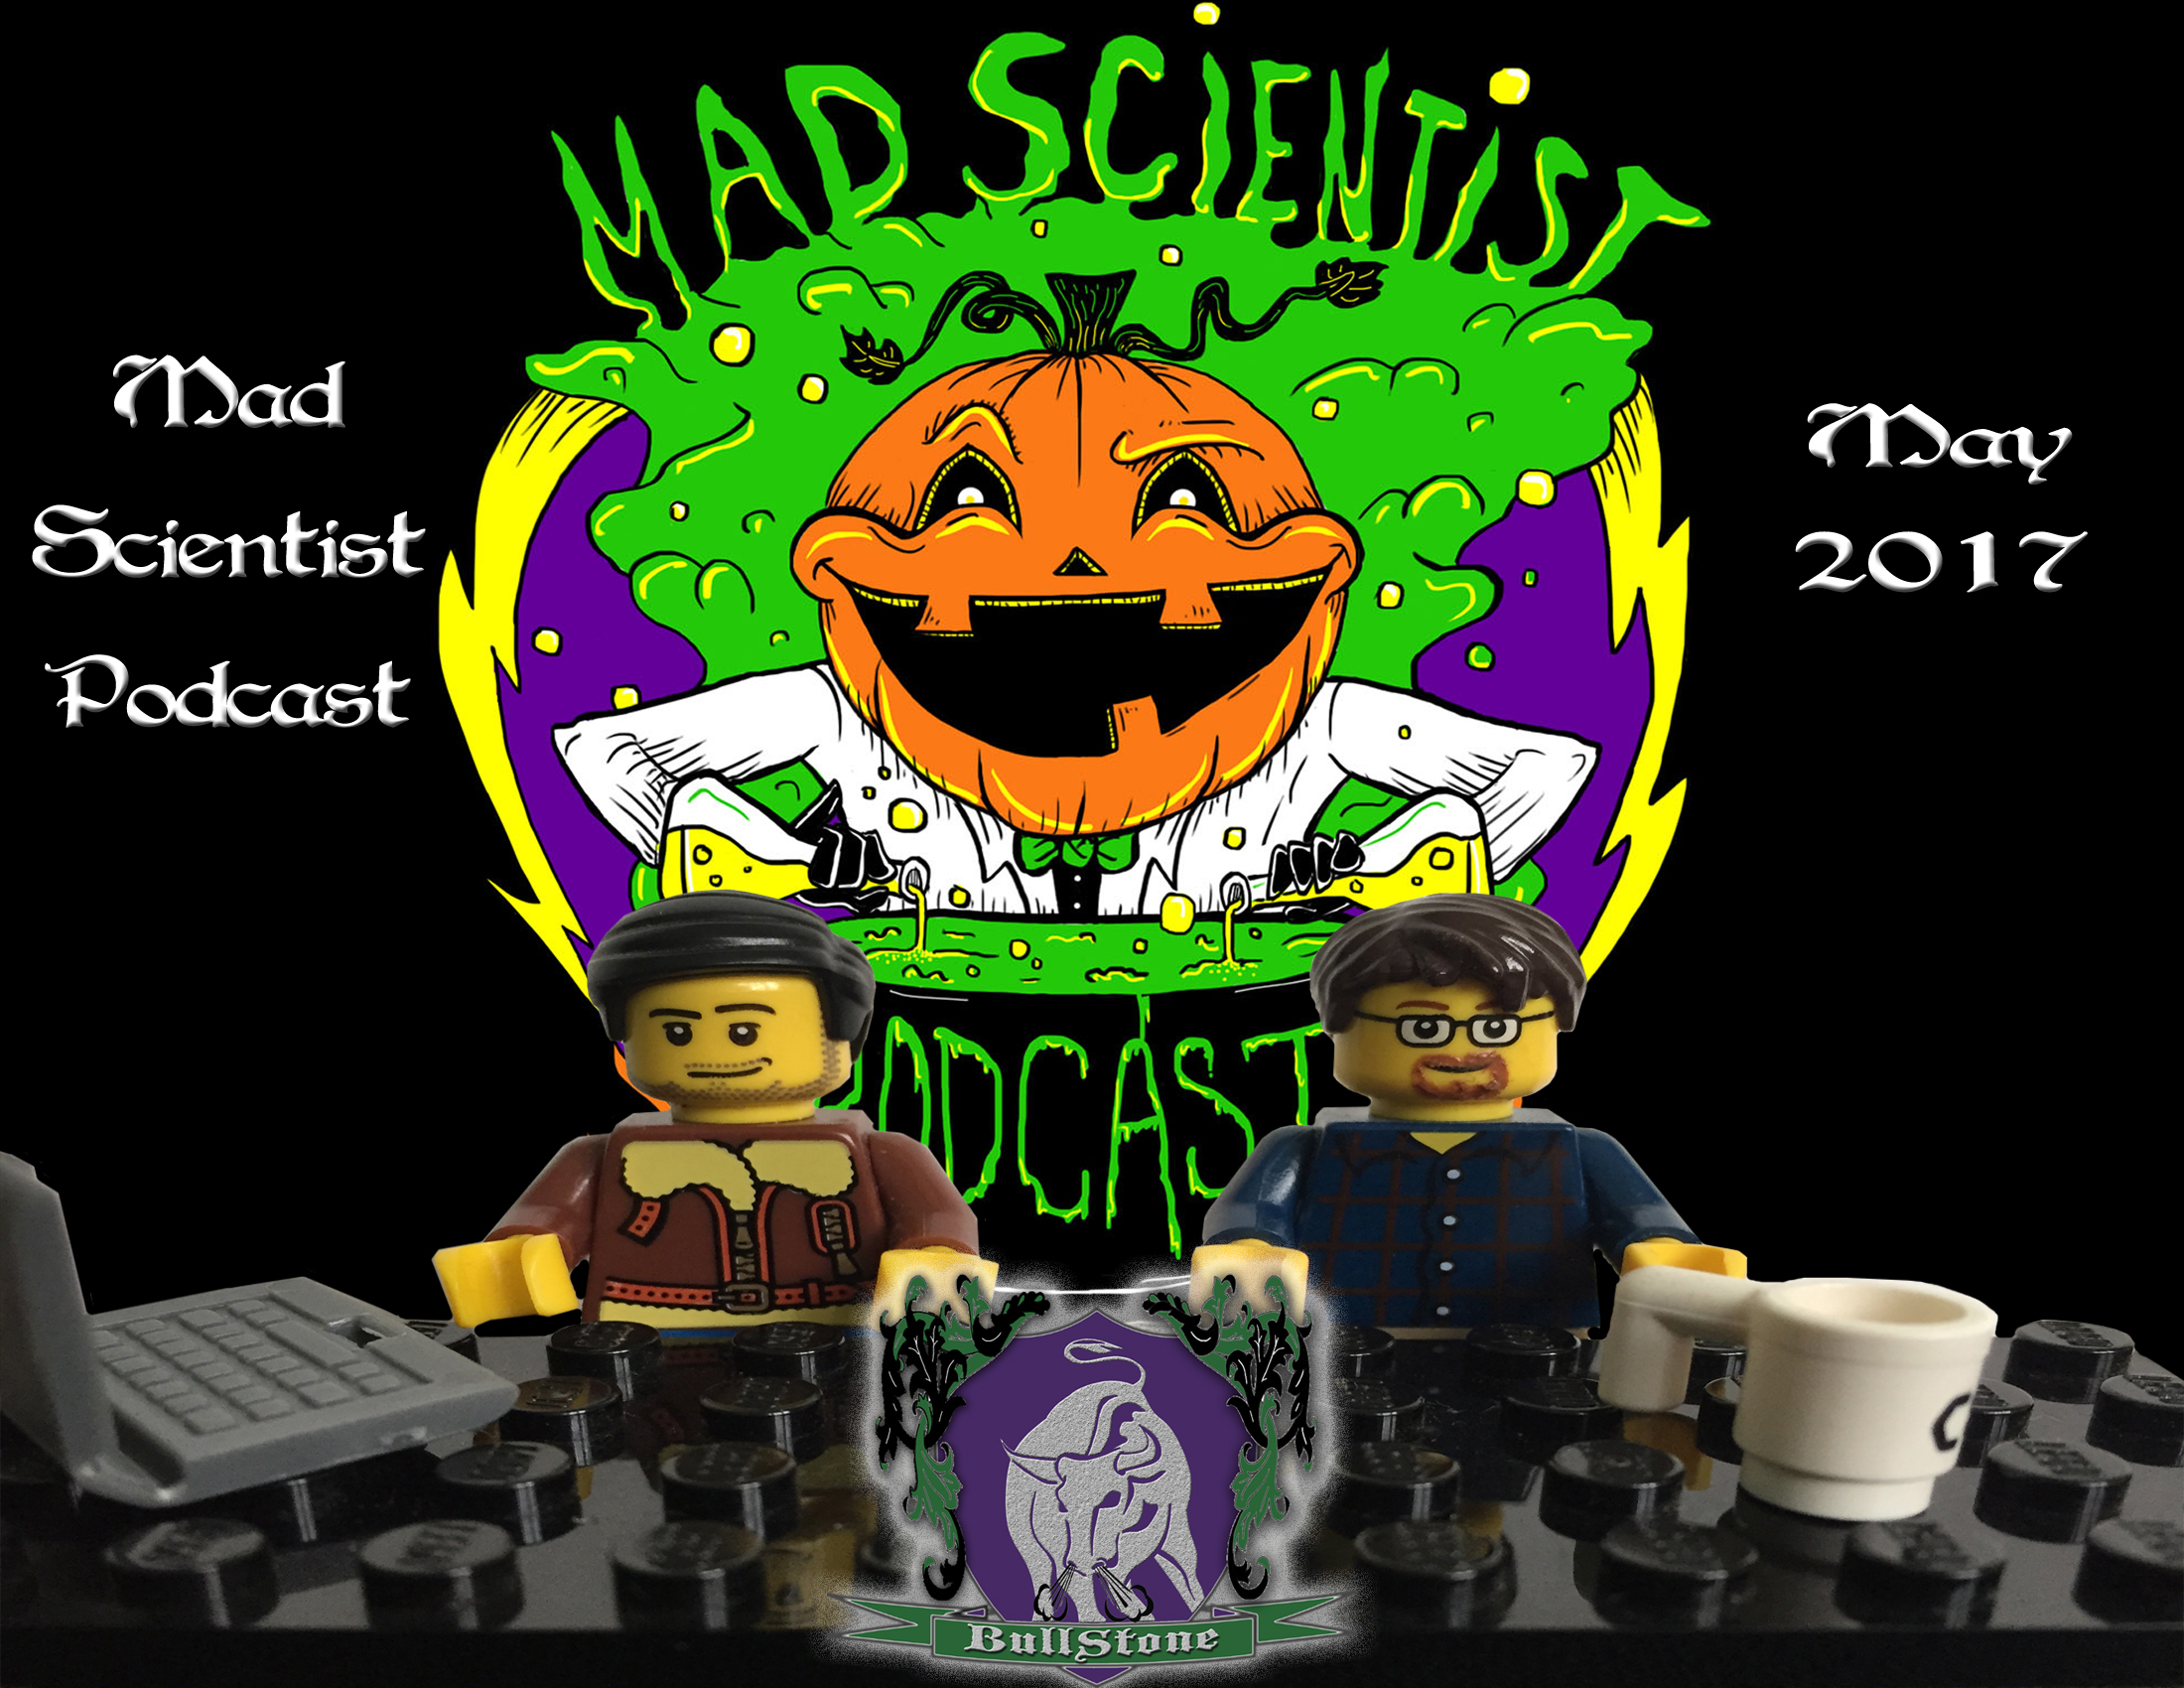 BullStone 27: Mad Scientist Podcast, May 2017